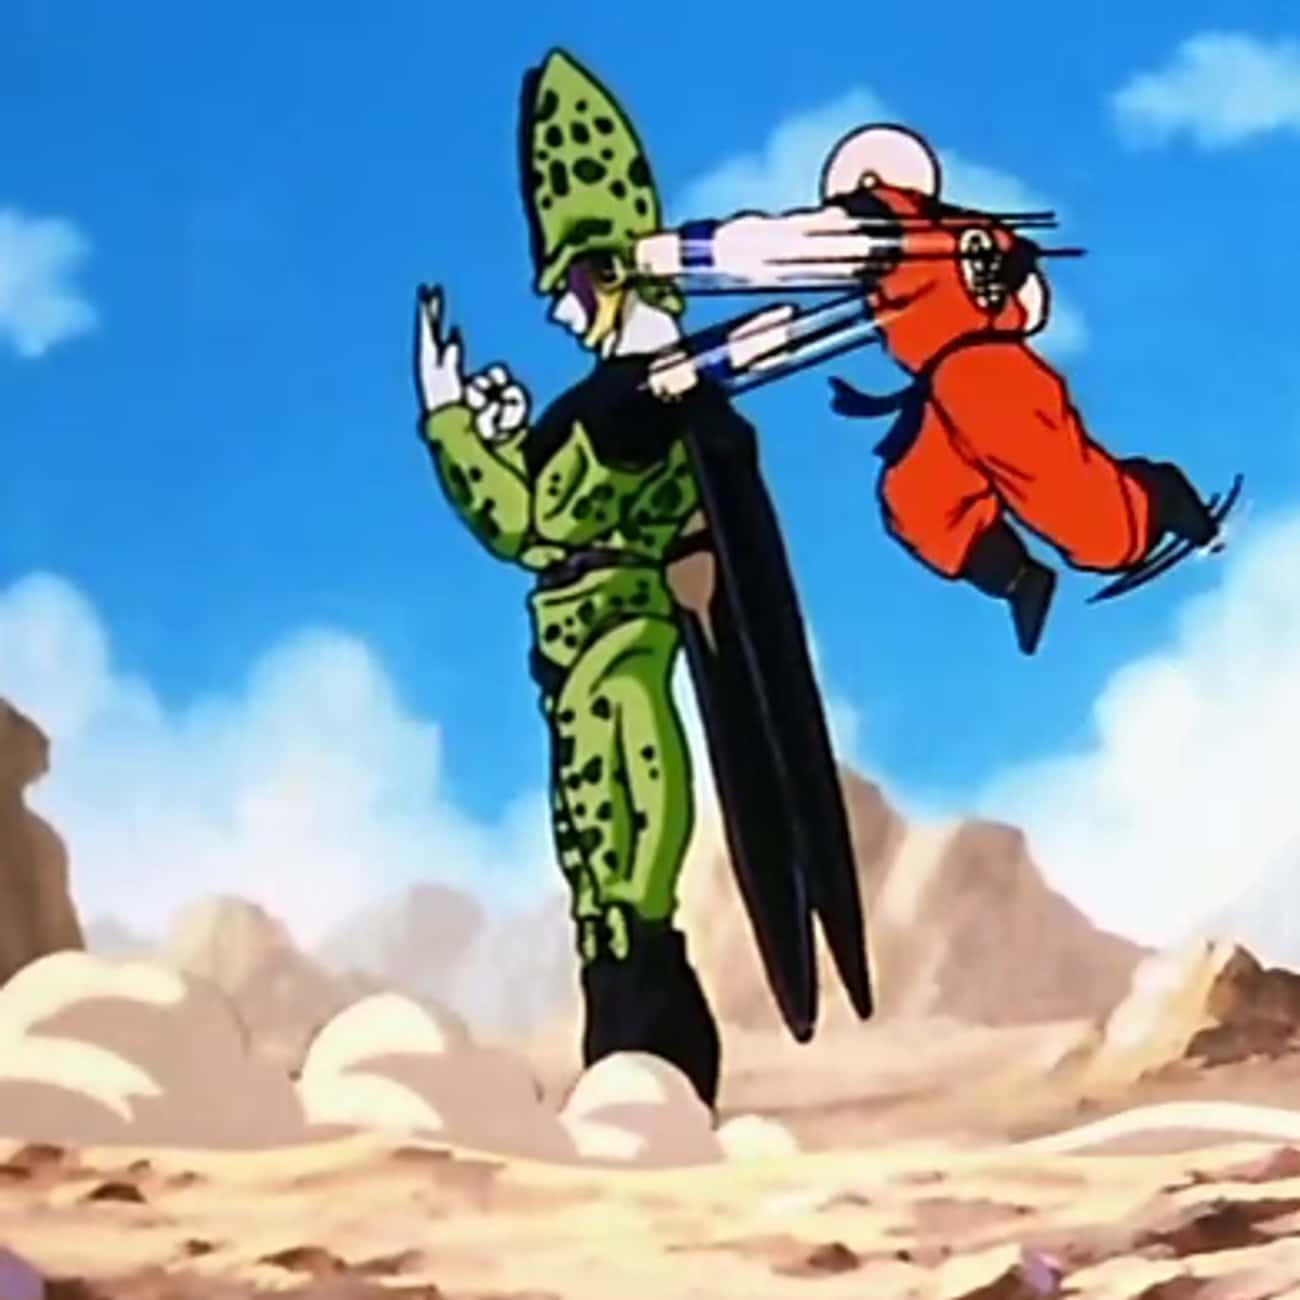 18 Reasons Krillin Is The Best Character on Dragon Ball Z